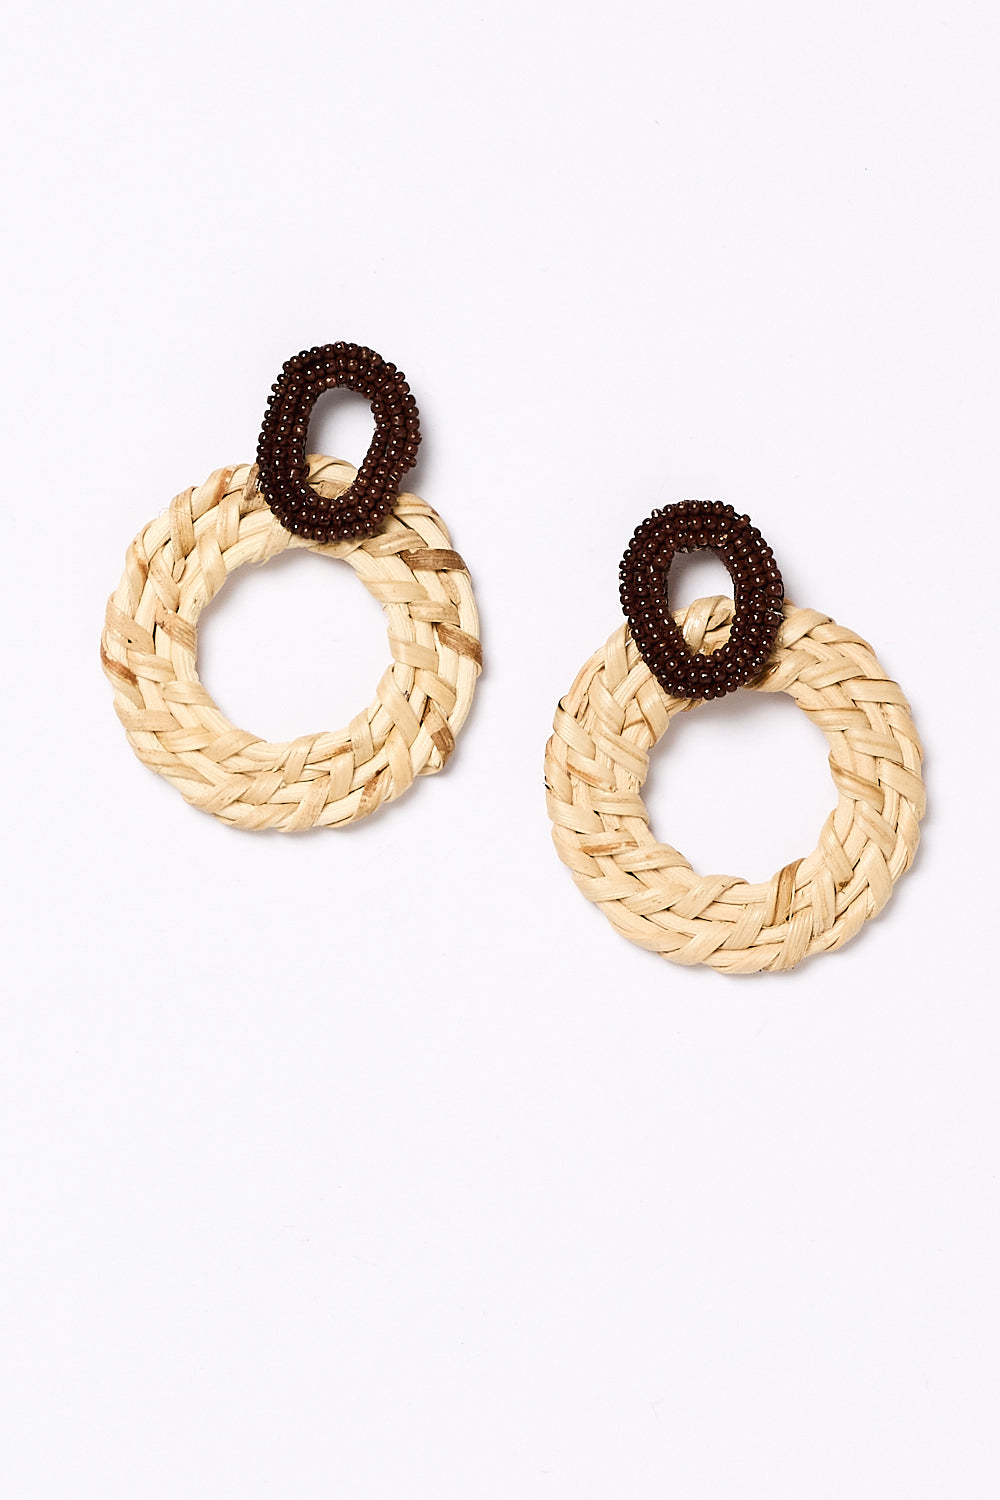 Beaded Circle Weave Earrings in Chocolate and Natural